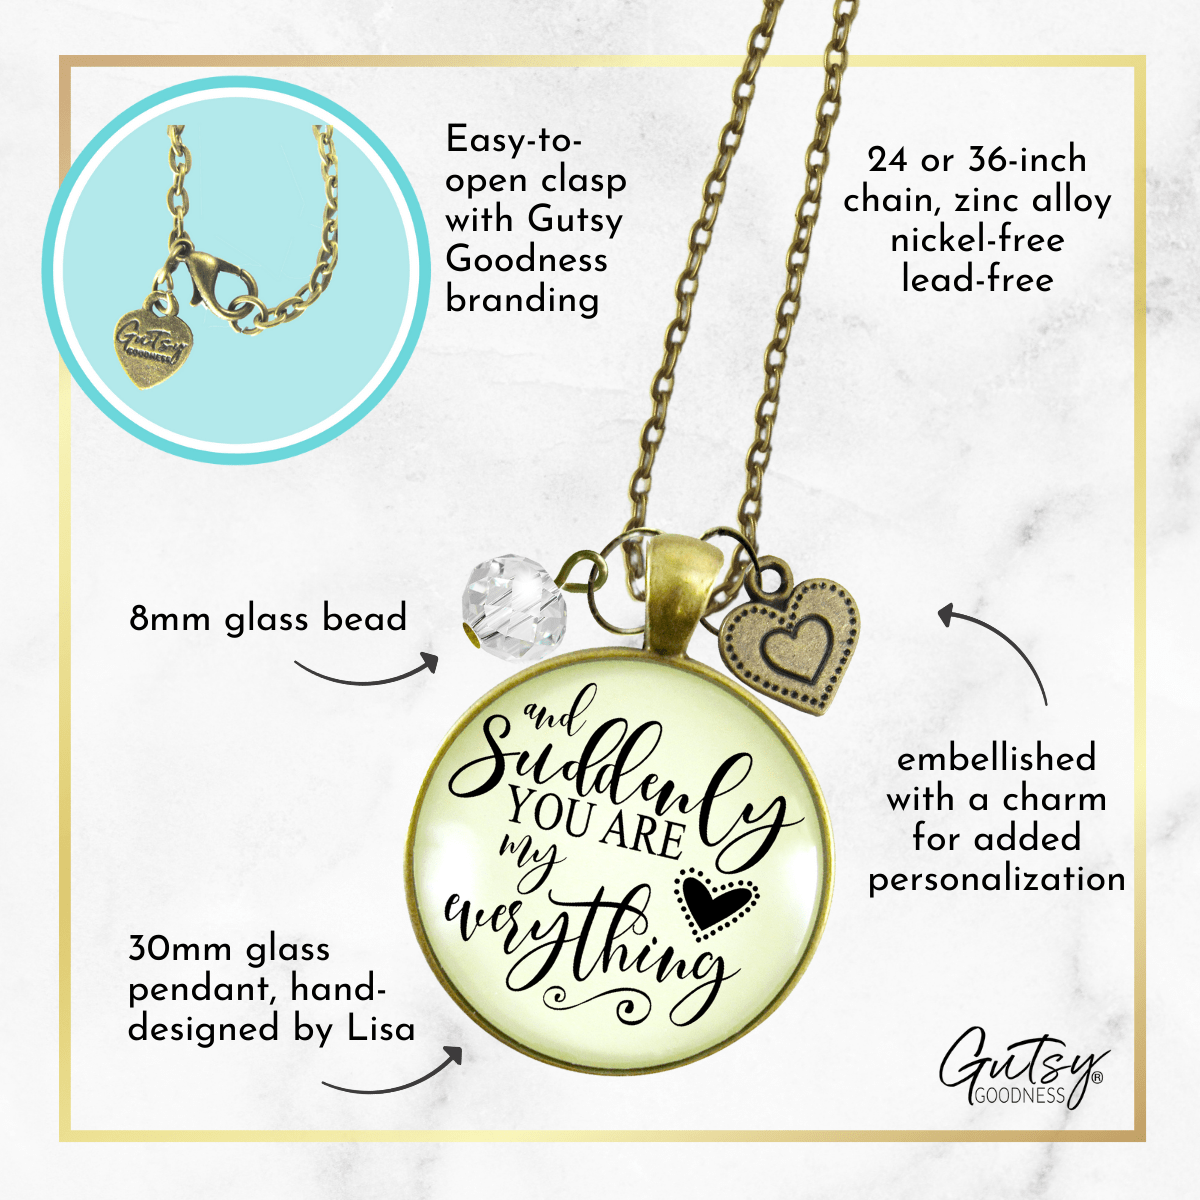 Gutsy Goodness Girlfriend Wife Special Woman Necklace From Man Sentimental Gift - Gutsy Goodness Handmade Jewelry;Girlfriend Wife Special Woman Necklace From Man Sentimental Gift - Gutsy Goodness Handmade Jewelry Gifts